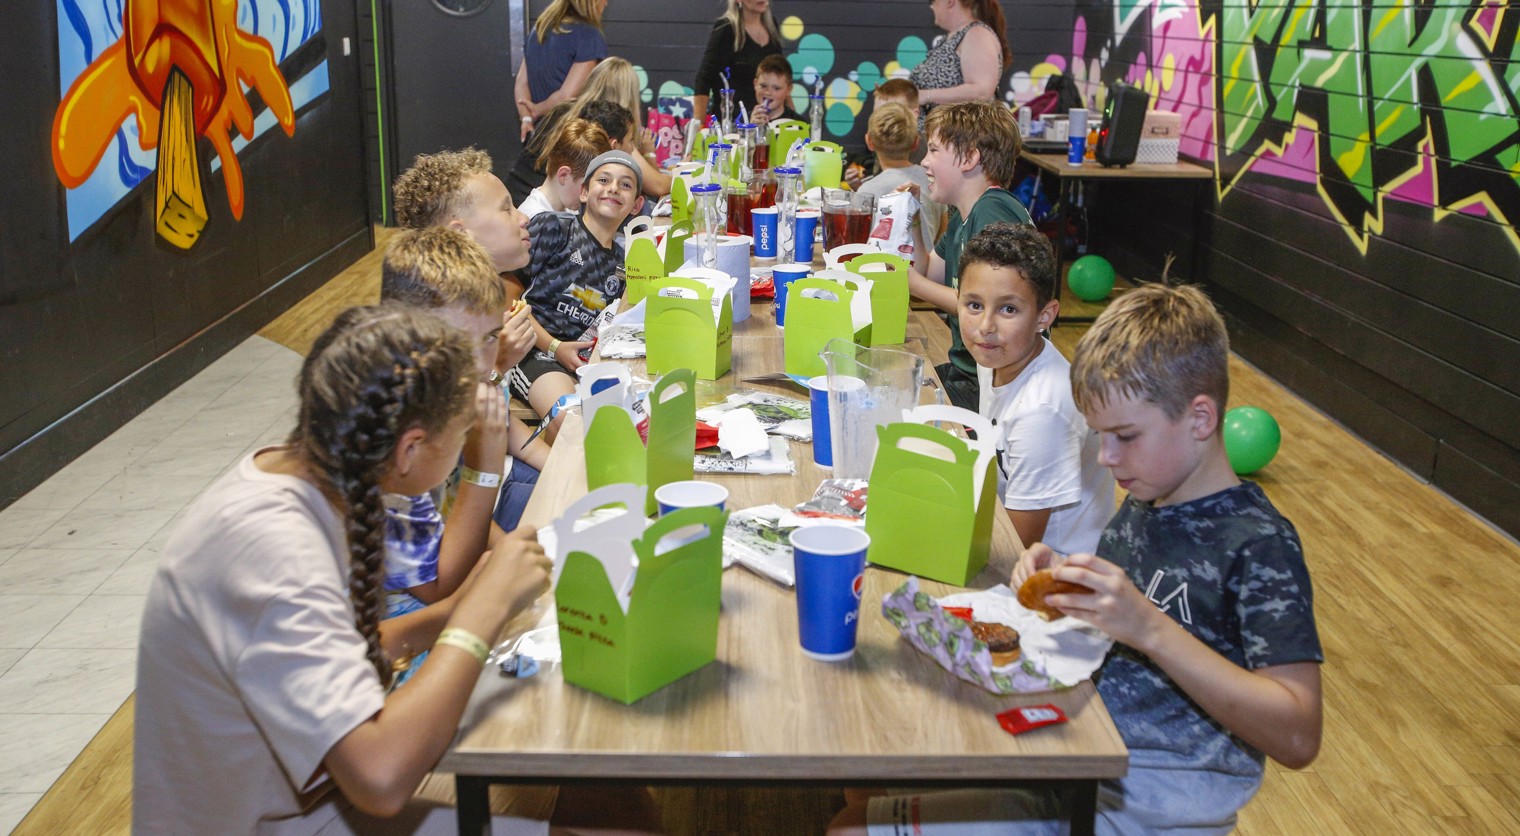 Children enjoying a birthday party at Flip Out UK